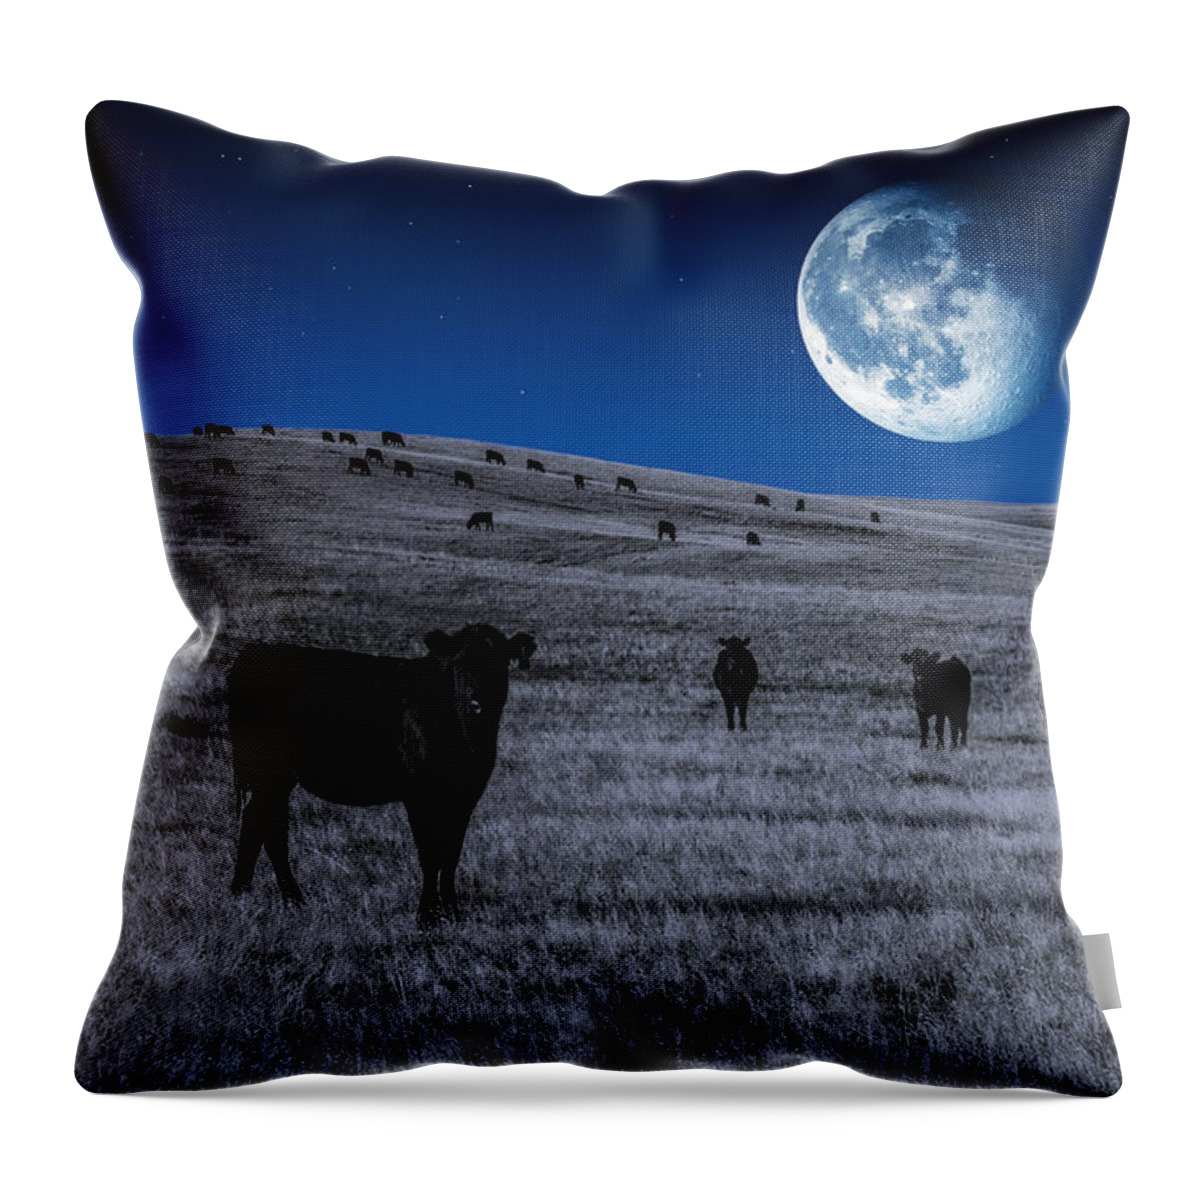 Cows Throw Pillow featuring the photograph Alien Cows by Todd Klassy